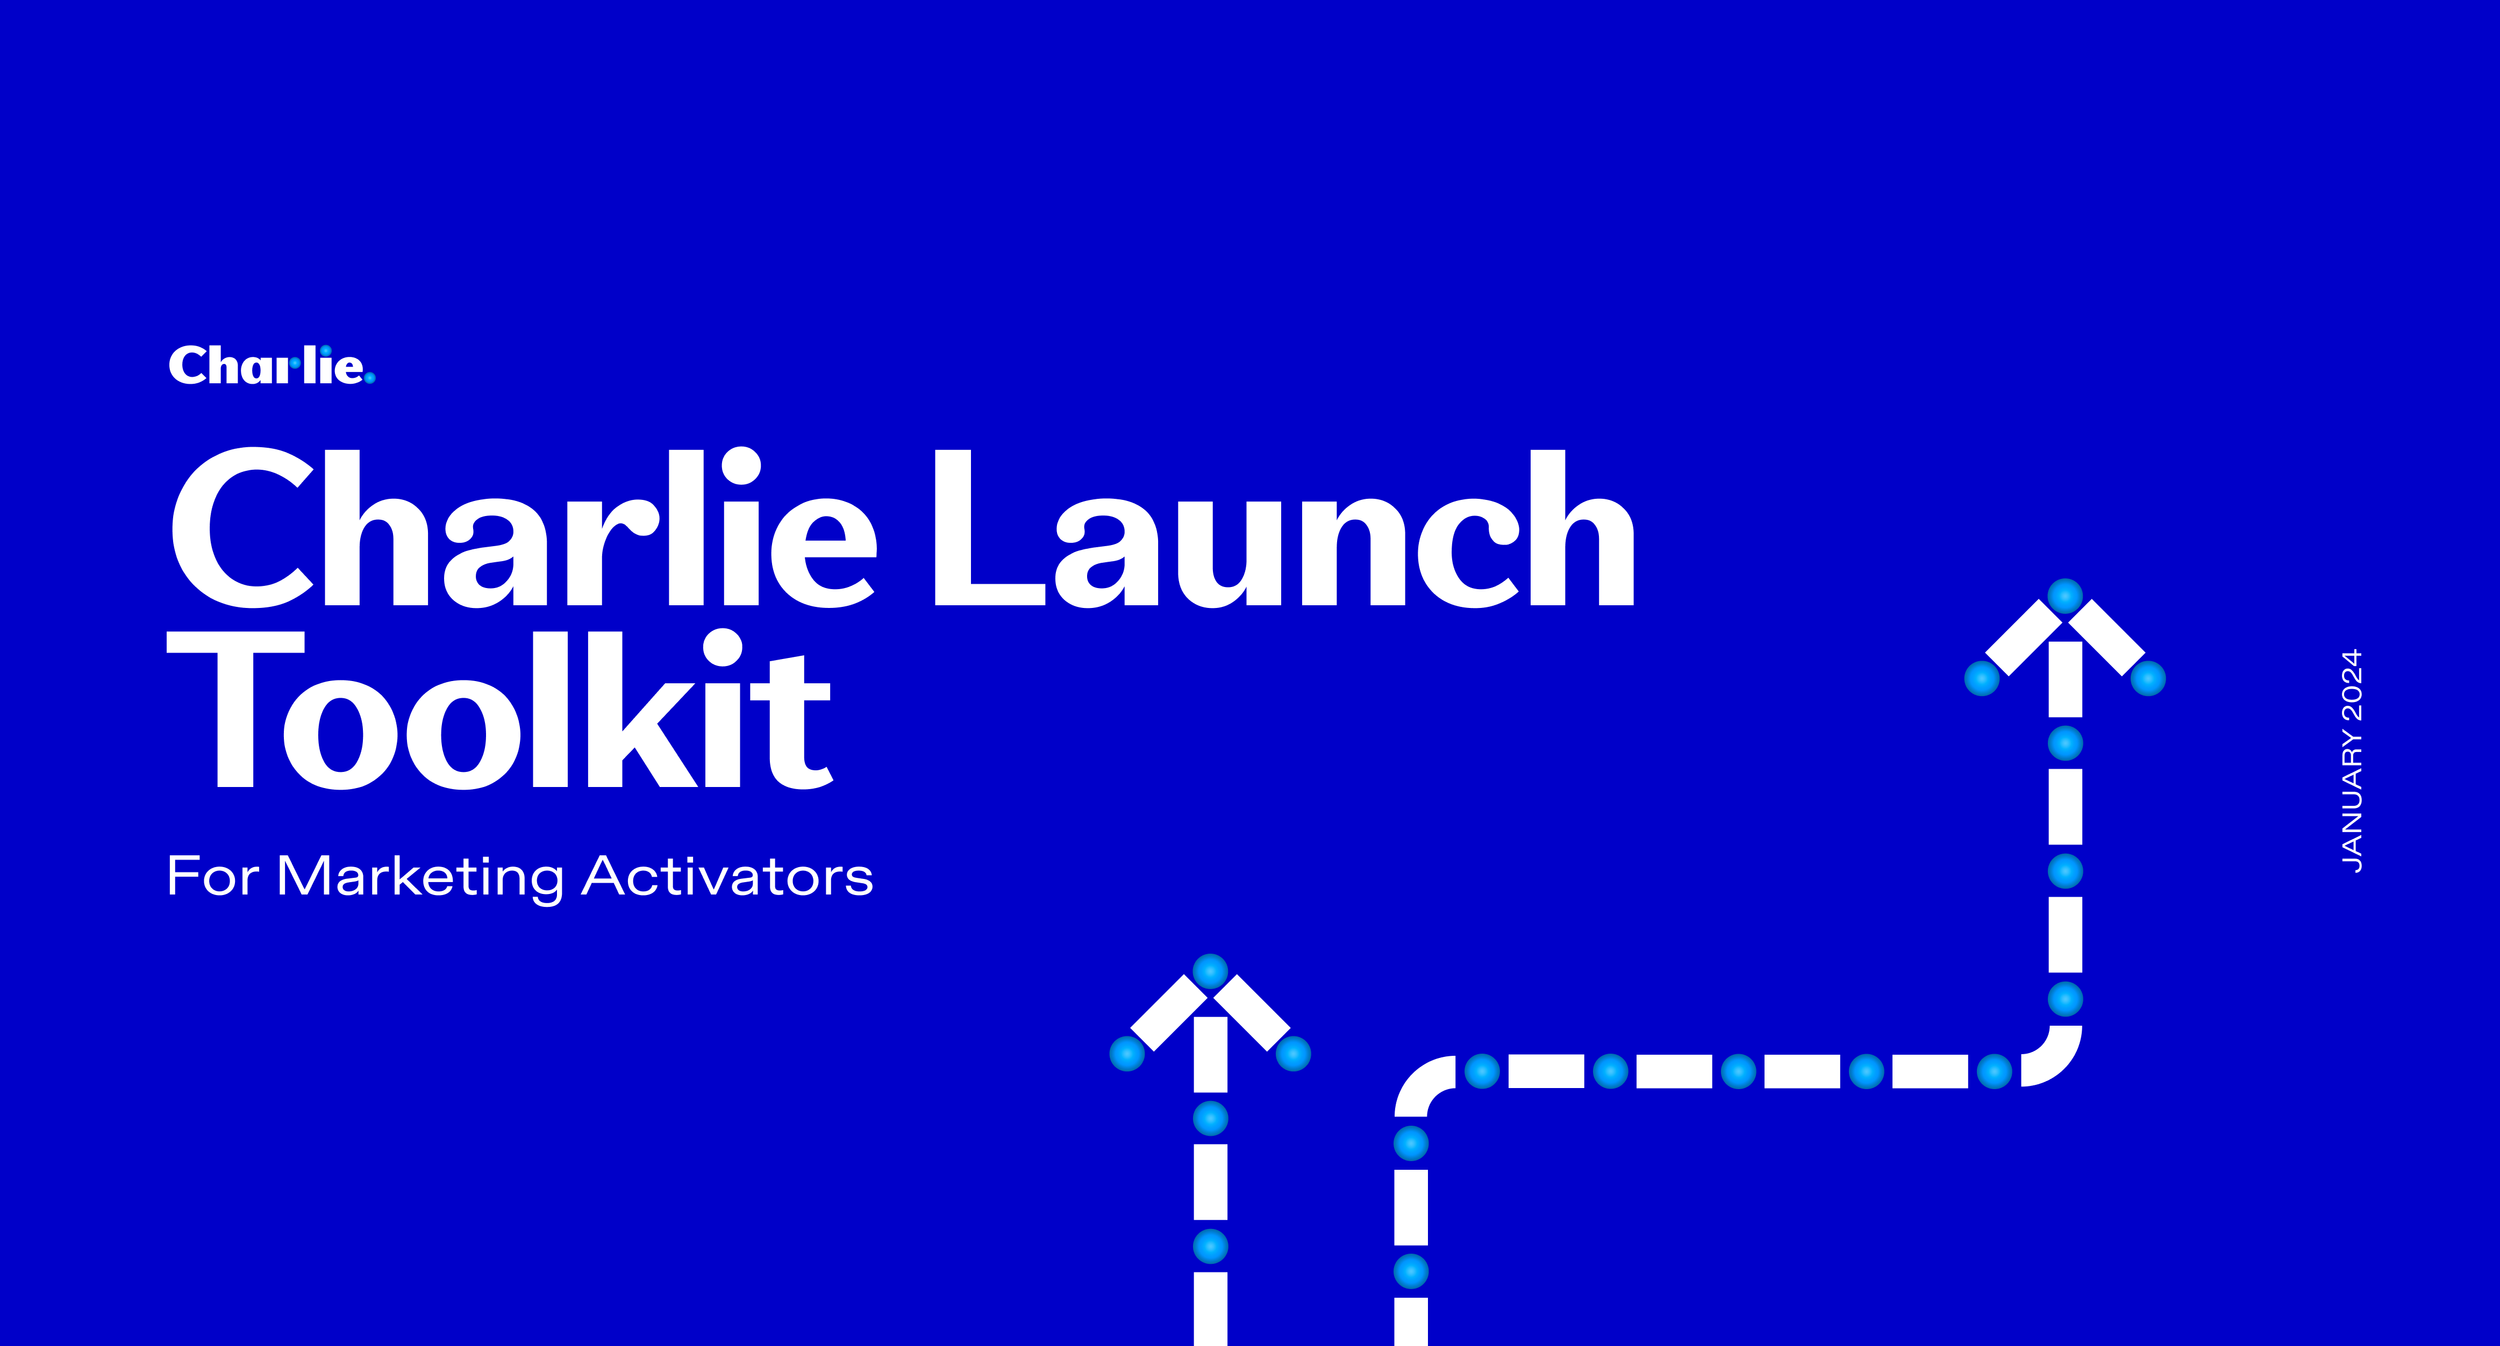 charlie_launch_toolkit_marketing_activators_1 V2.png